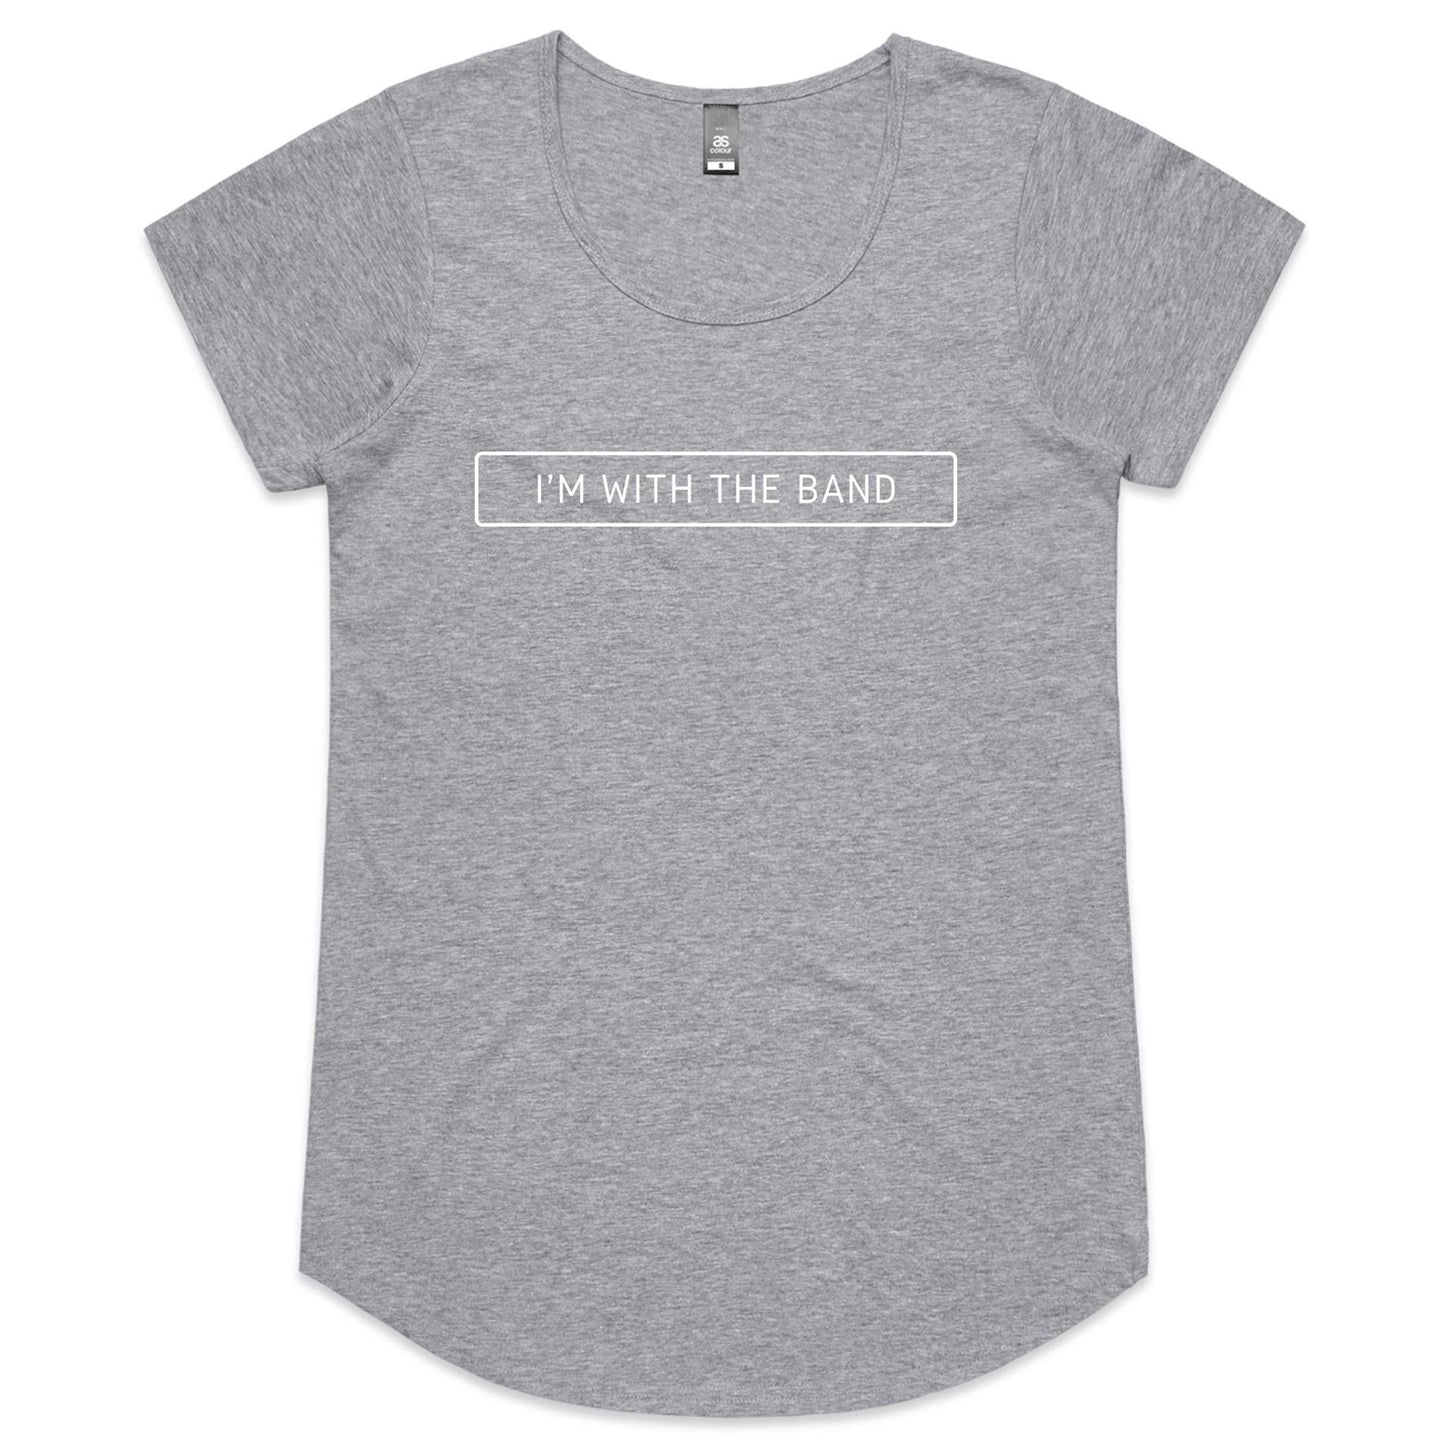 I'm With The Band - Womens Scoop Neck T-Shirt Grey Marle Womens Scoop Neck T-shirt Music